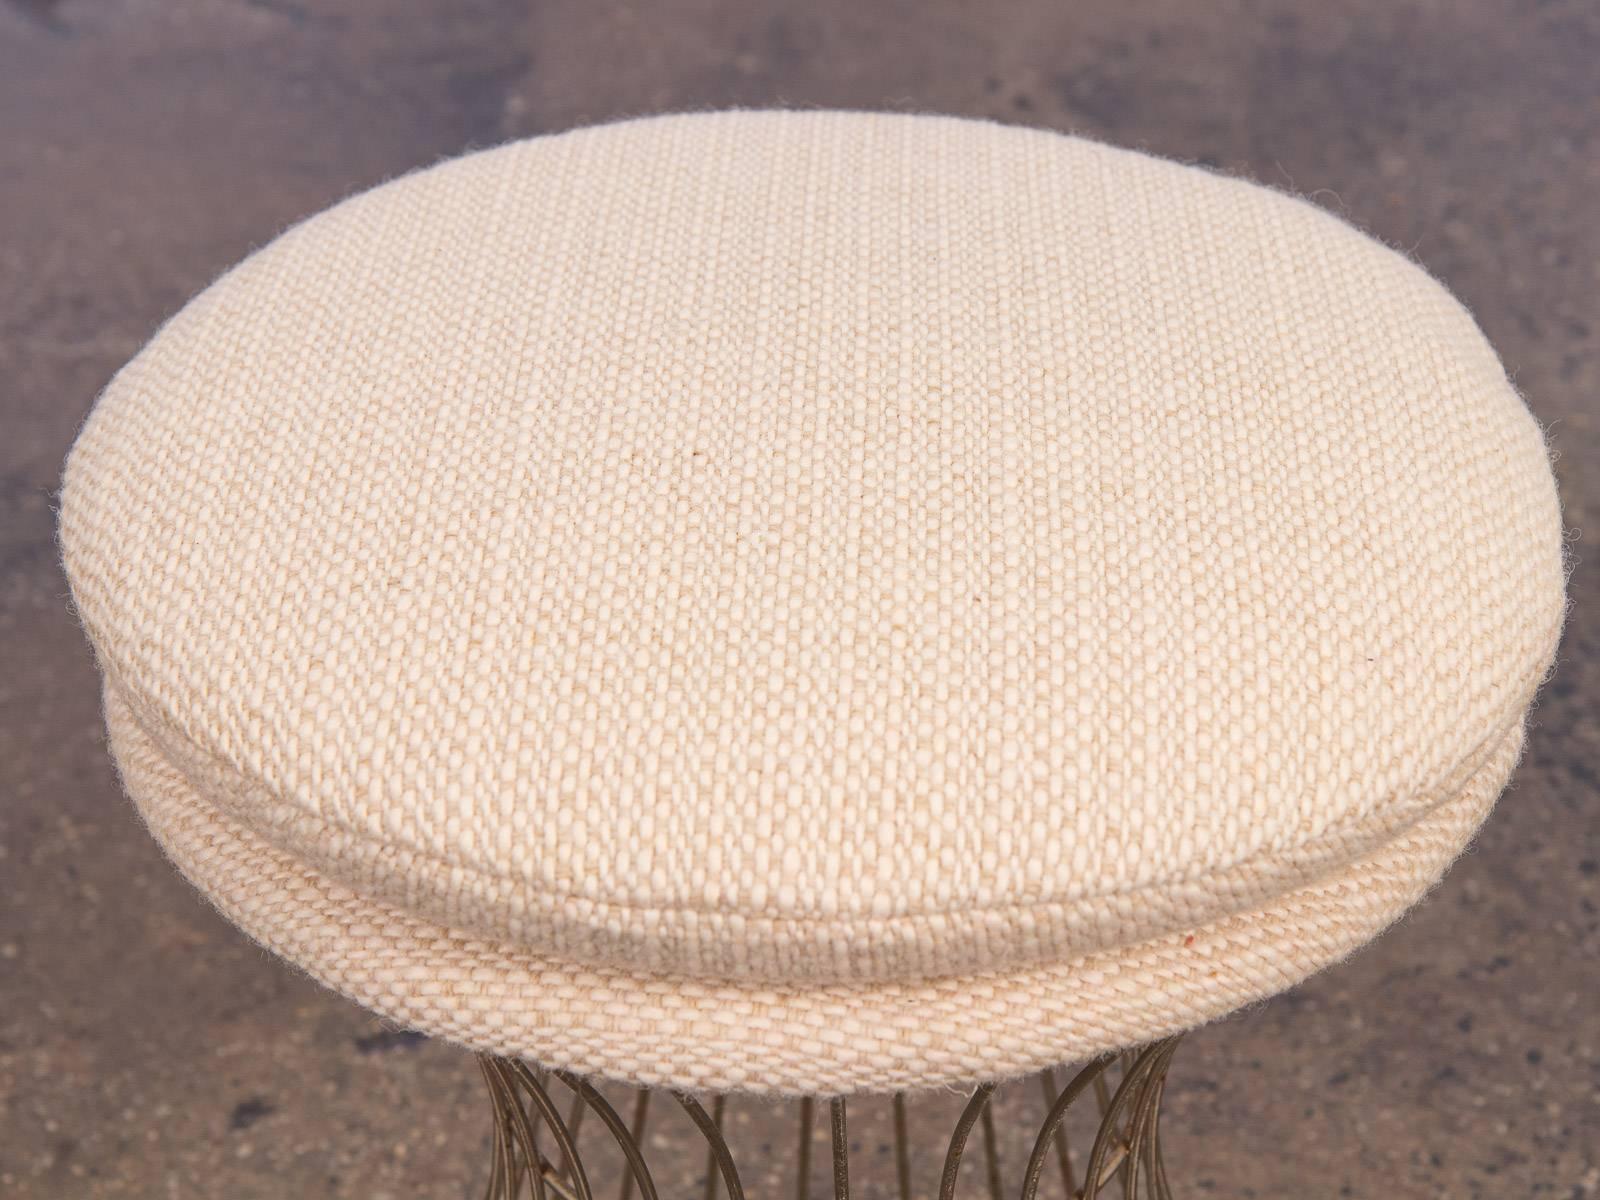 Vintage wire stool in a creamy, textural wool in the manner of Warren Platner. Excellent condition. The plush seat cushion has been newly replenished and upholstered. Gracefully perched on a 1960s, airy, steel wire base. Minimal design and compact